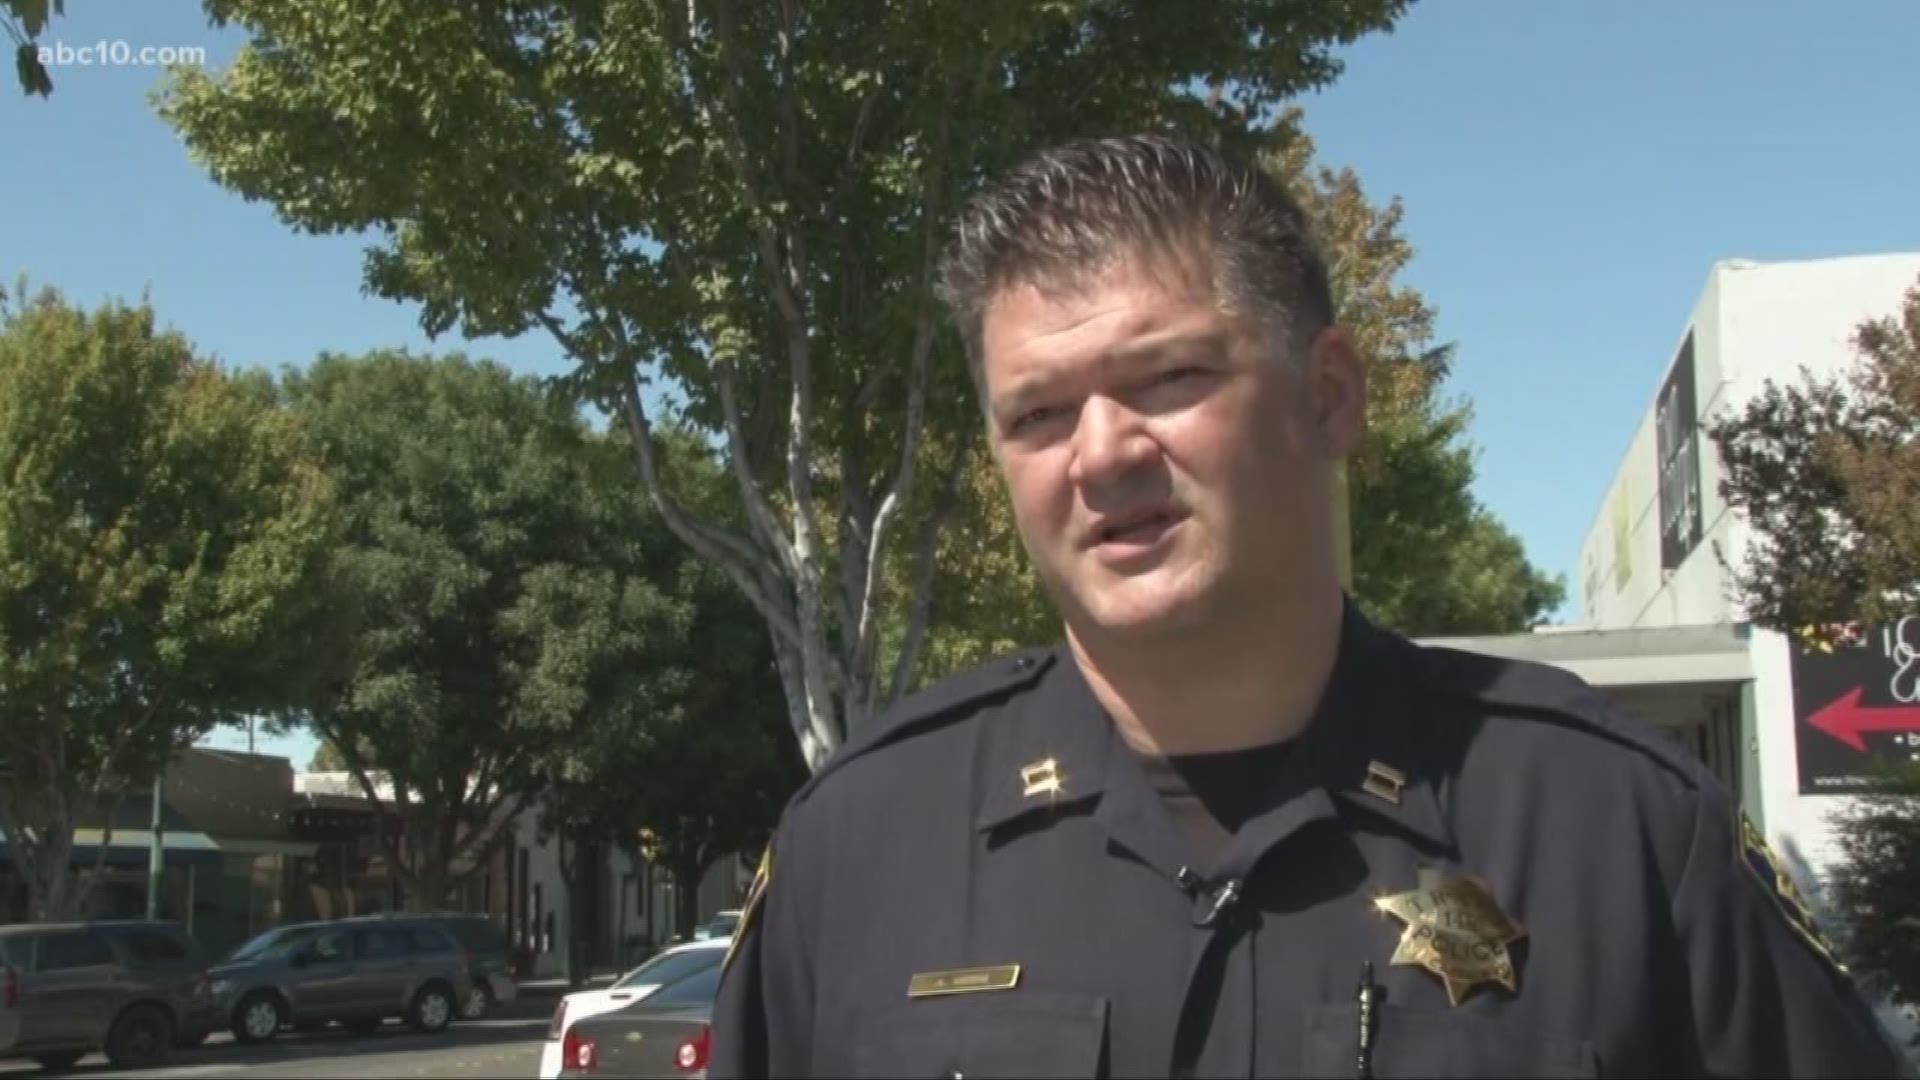 Interim Tracy Police Chief Brings New Direction To City